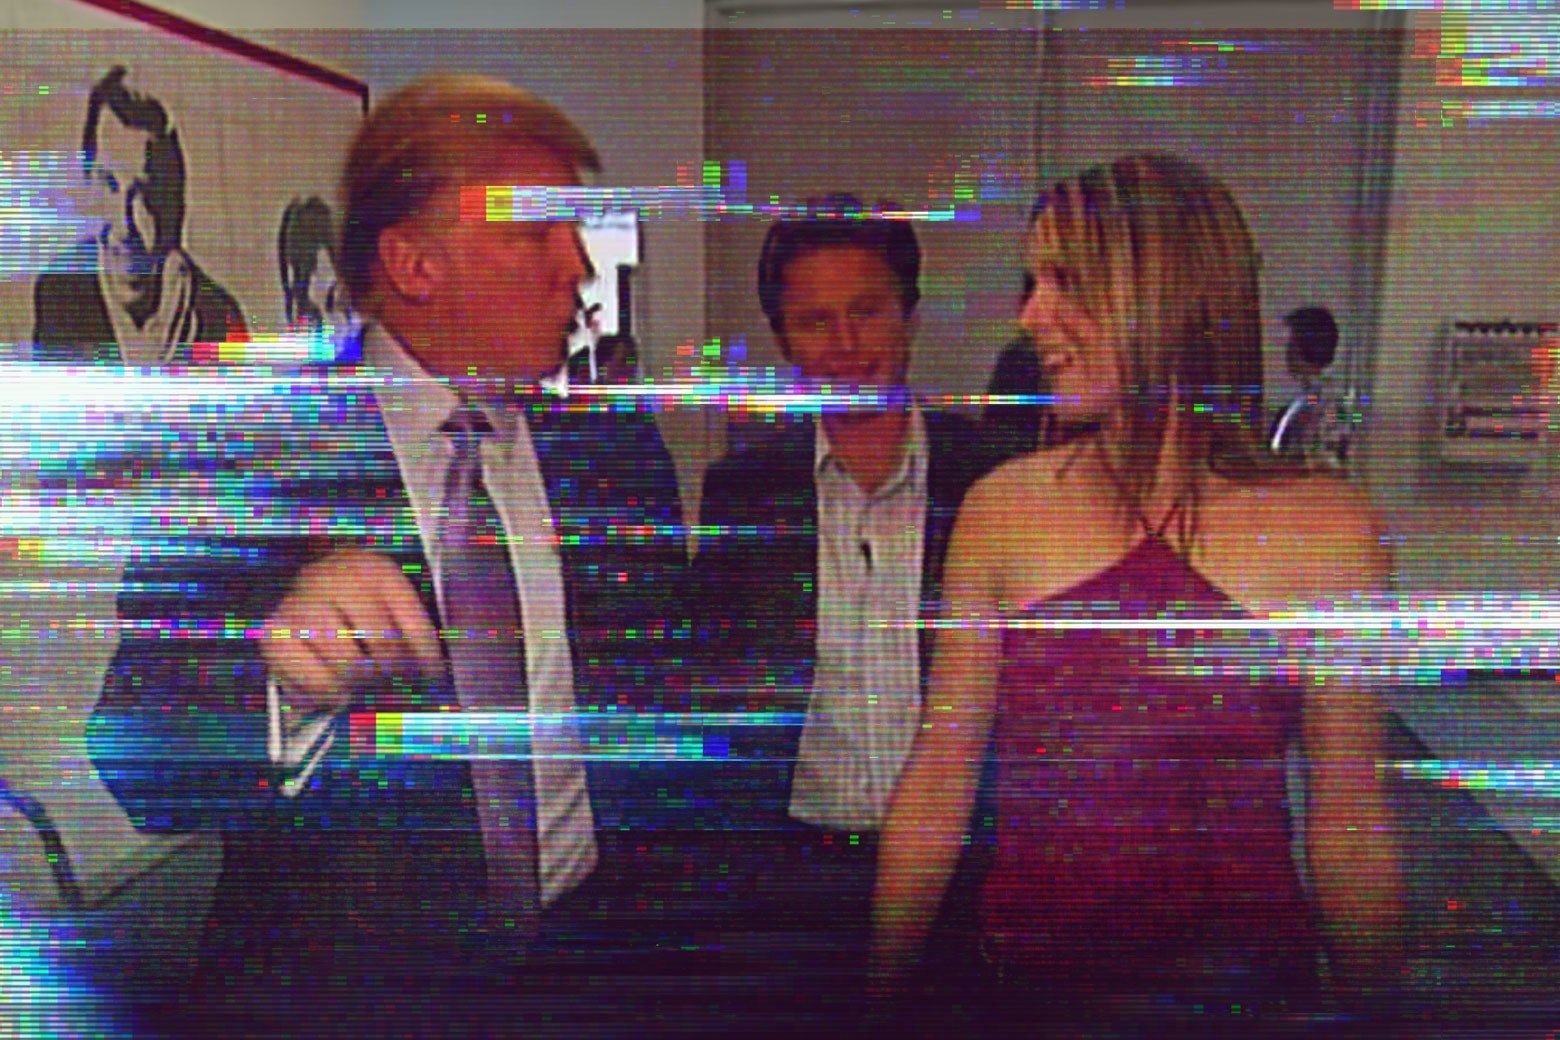 Trump and the Access Hollywood tape photo